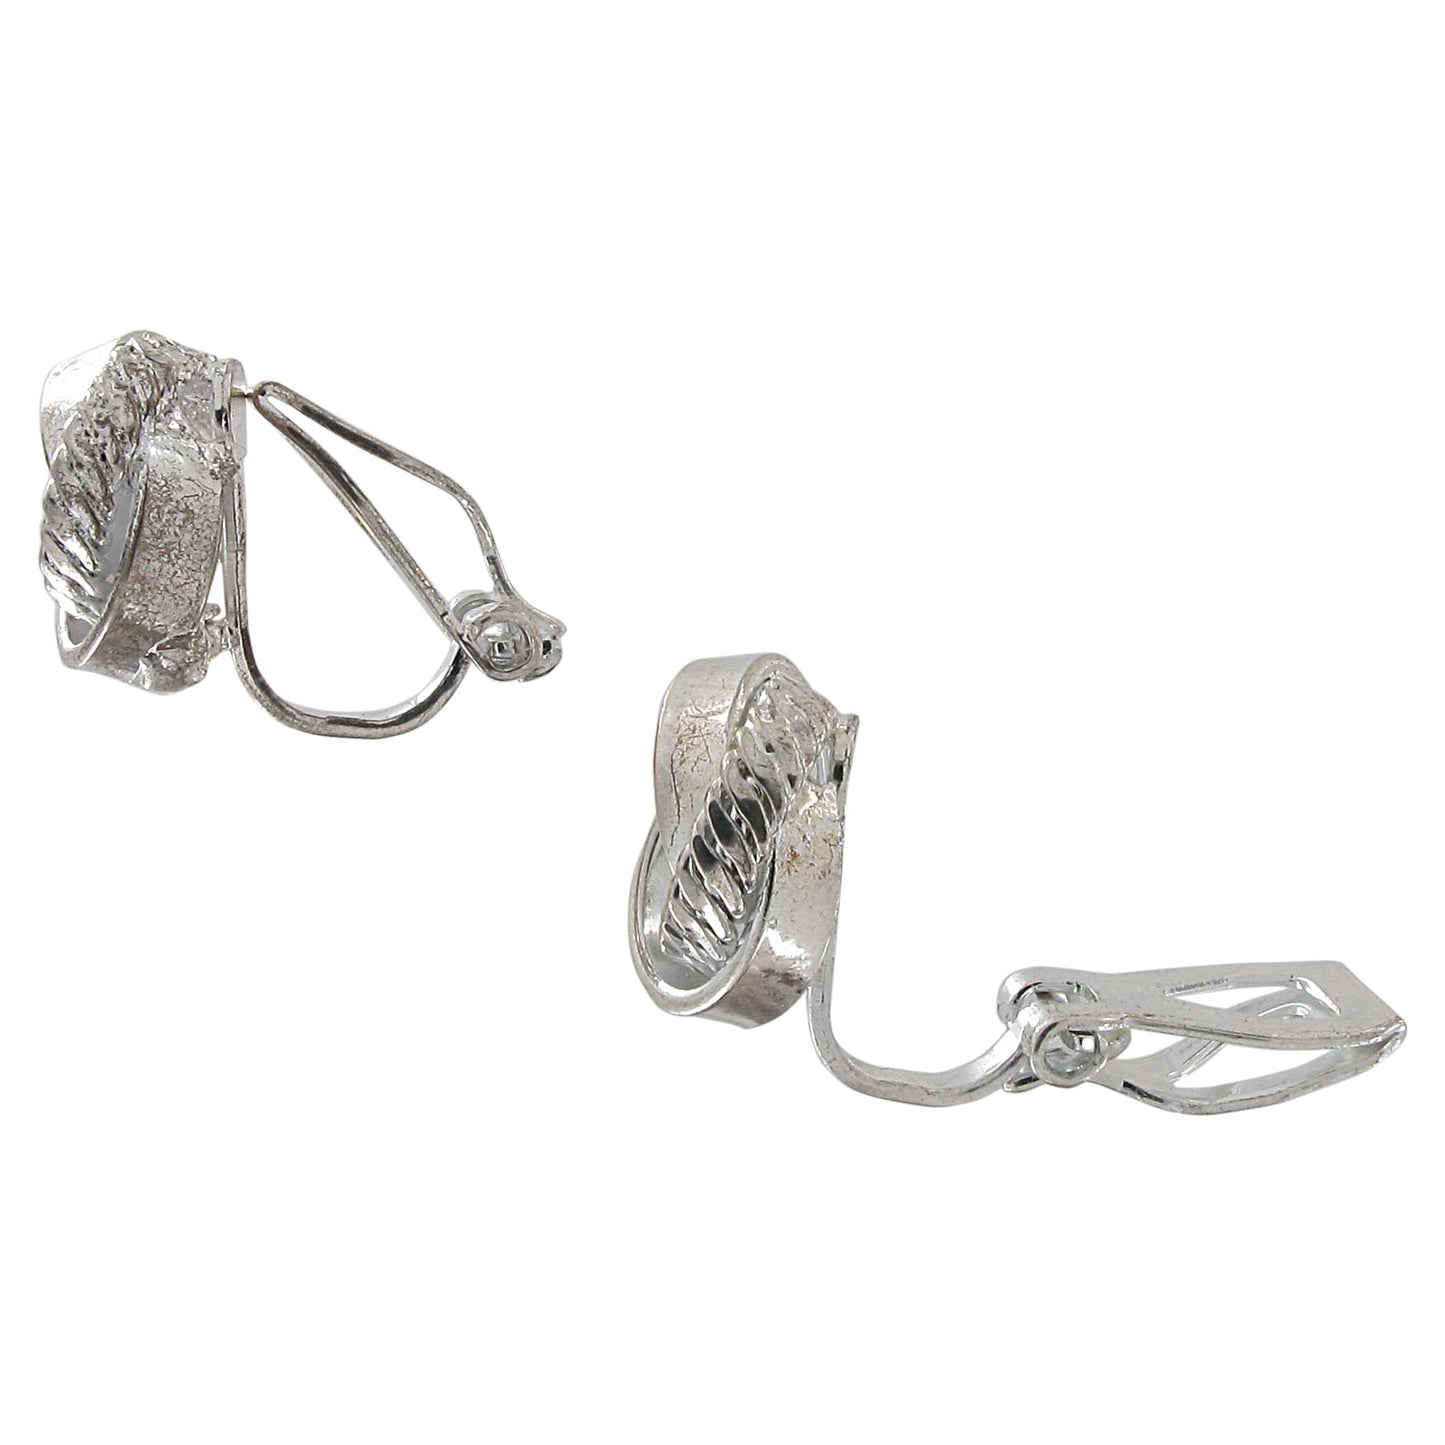 Silver Tone Spiral Ribbed Twisted Knot Clip Earrings Small